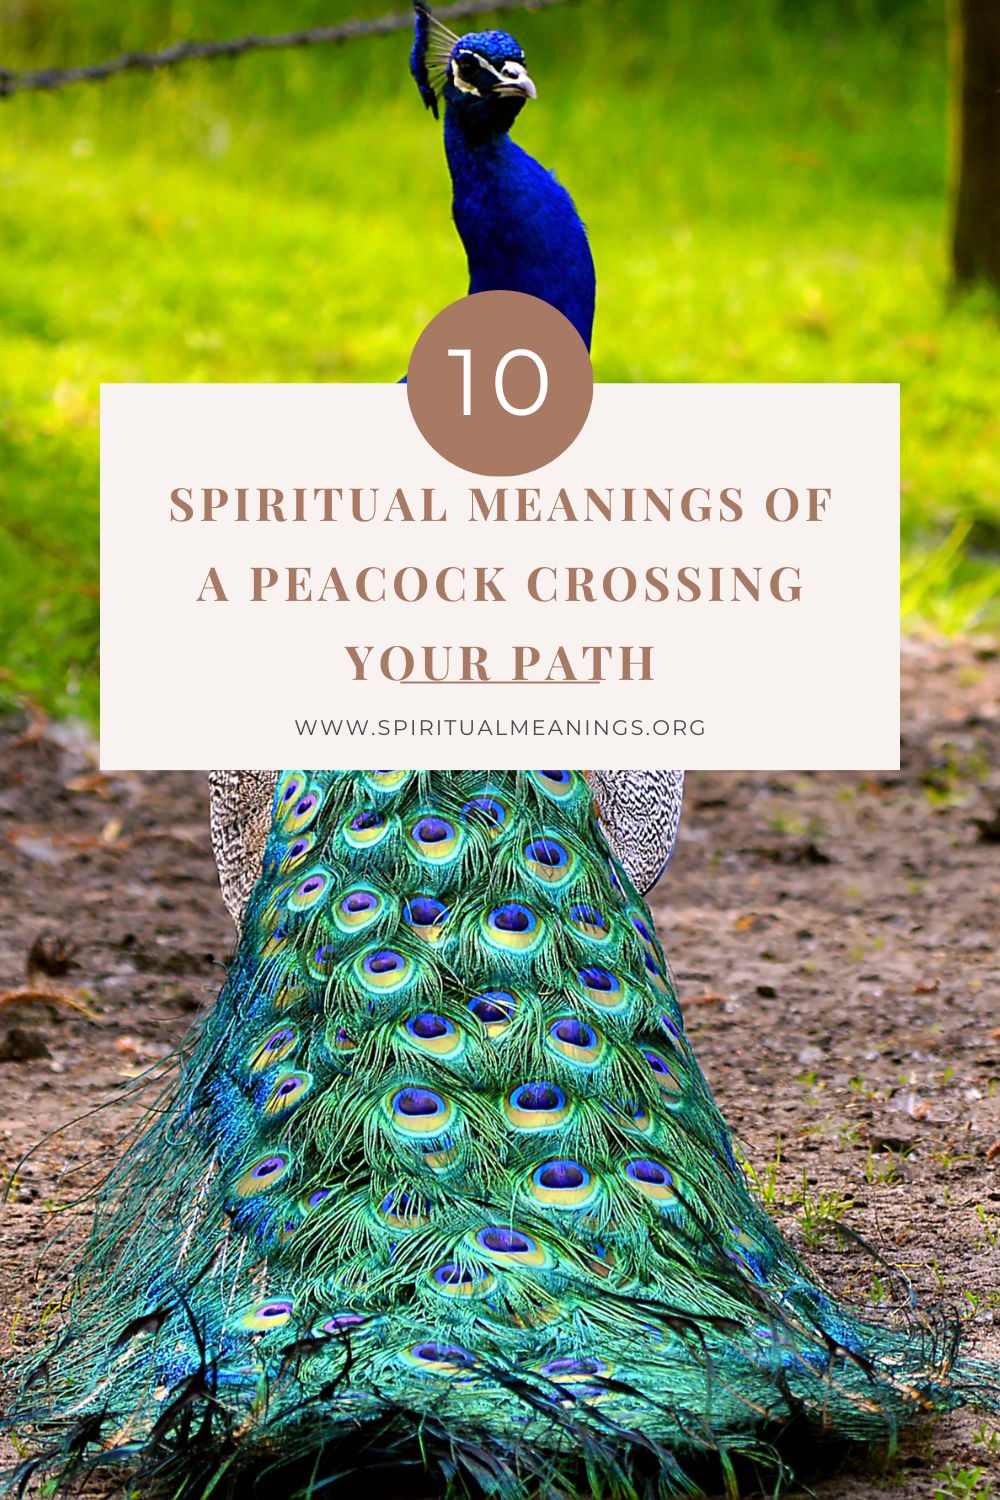 Spiritual Meanings of A Peacock Crossing Your Path